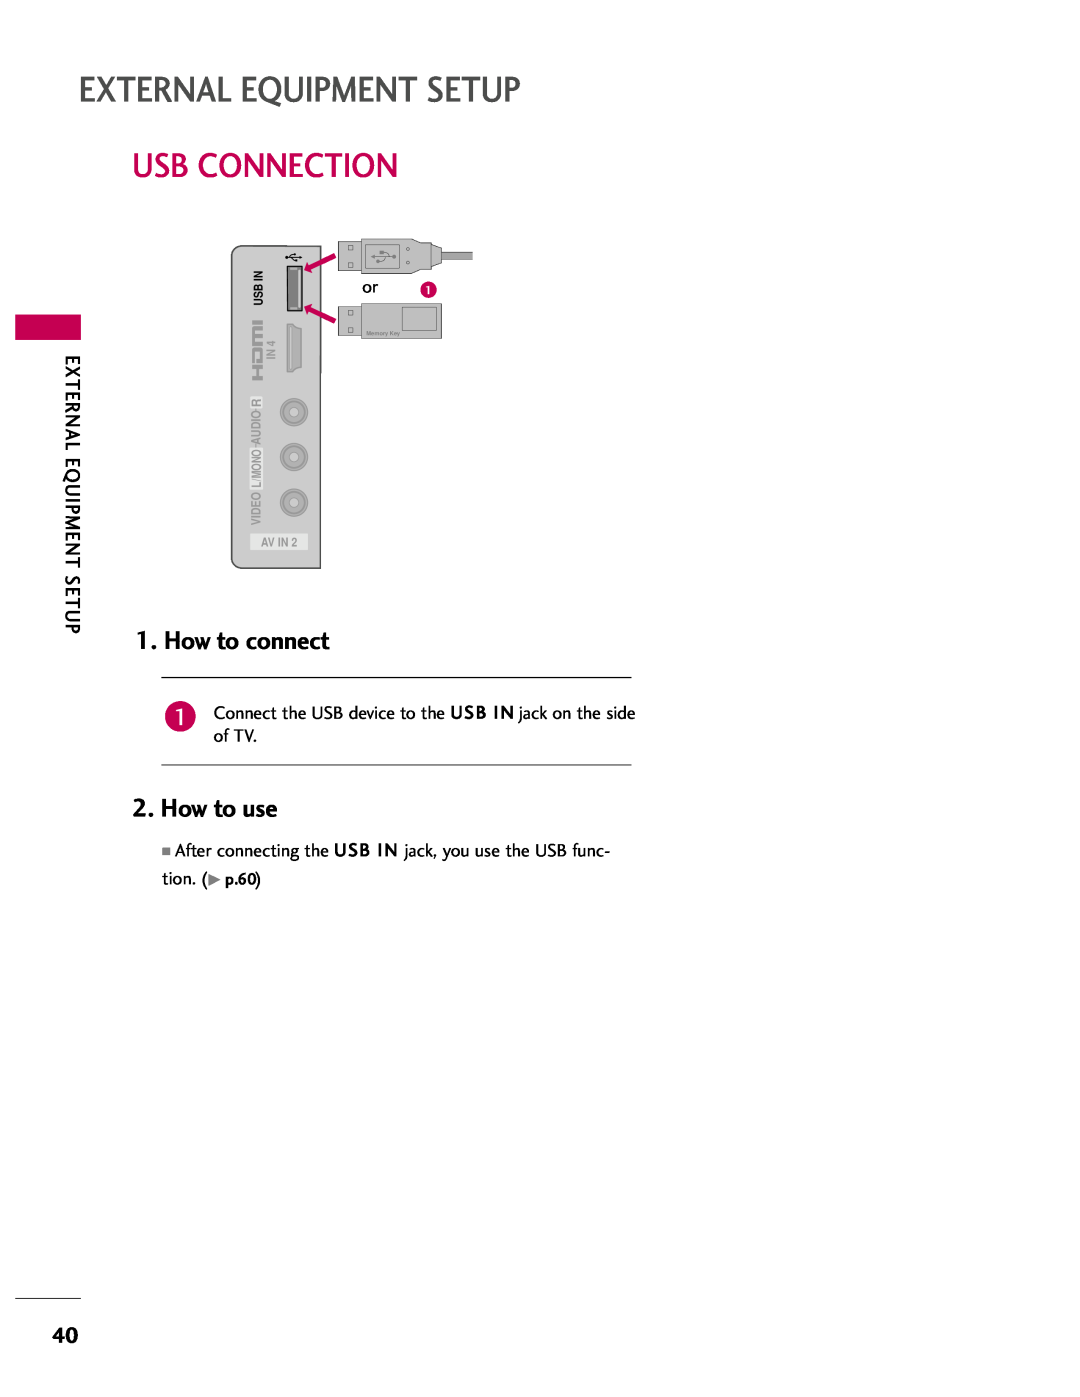 LG Electronics 37LH40 Usb Connection, External Equipment Setup, How to connect, How to use, Av In, Audio R, Video, L/Mono 